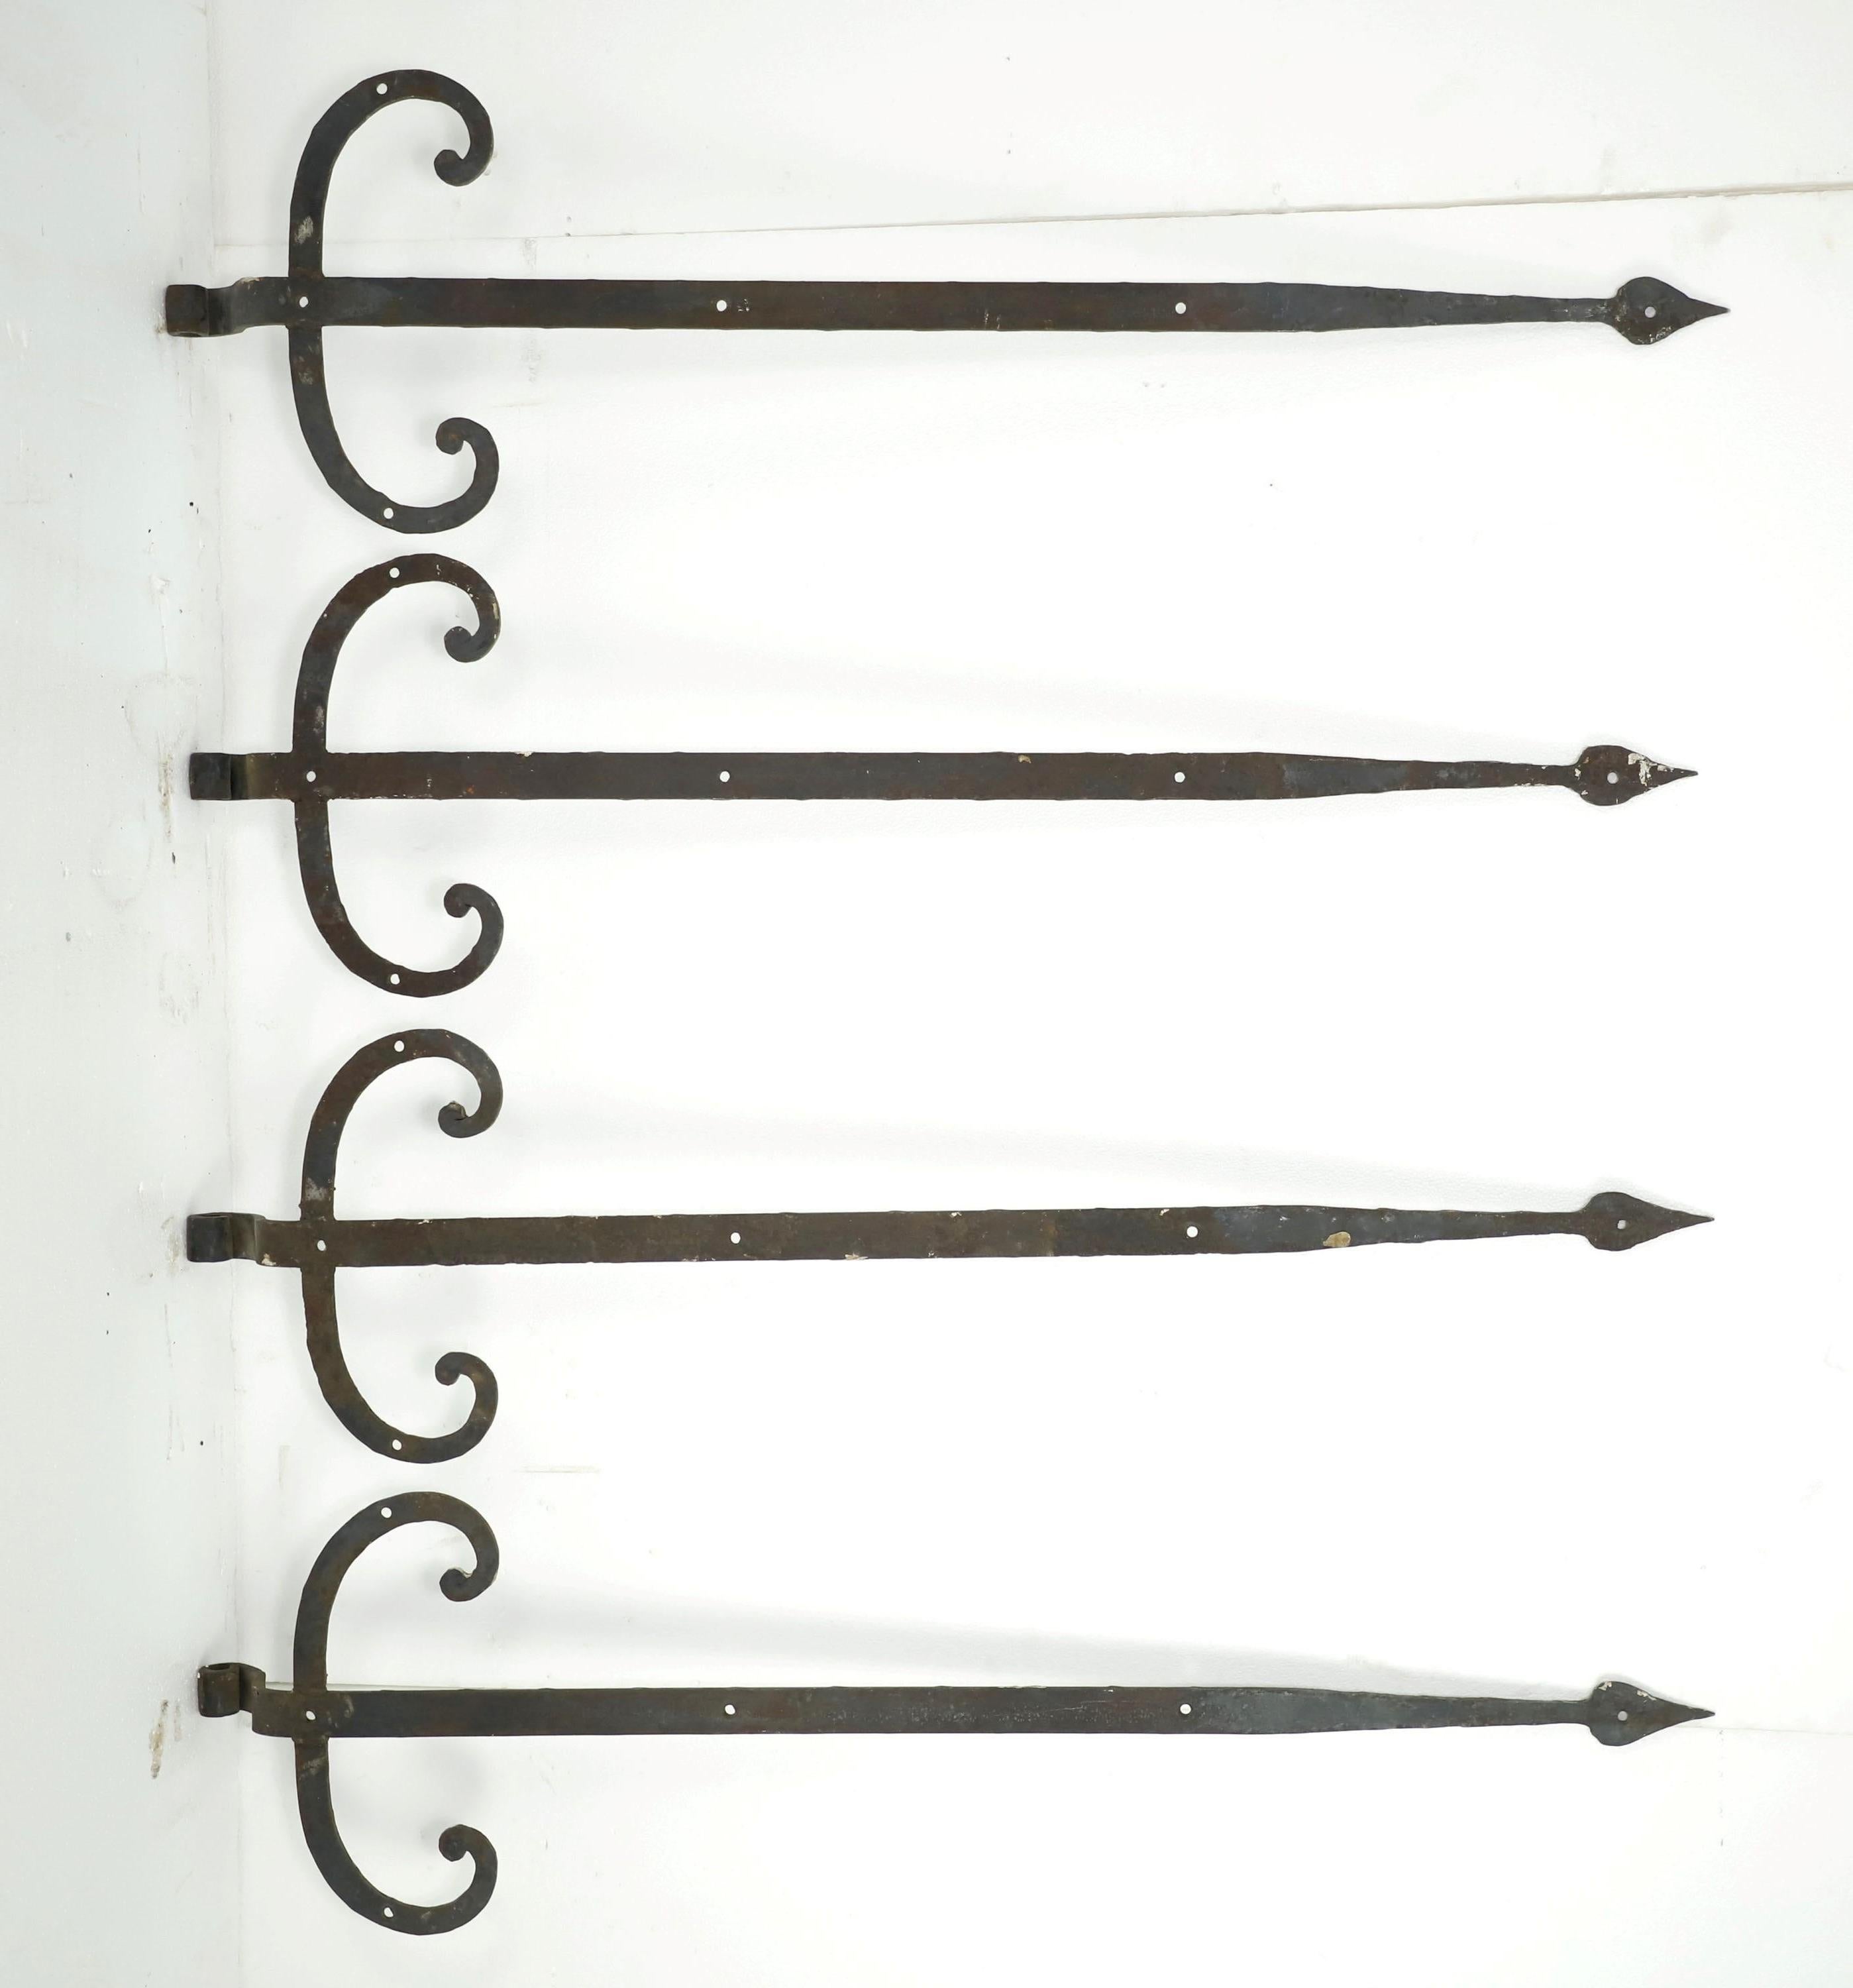 Black antique spear shaped hand forged wrought iron strap hinges with curled details on the sides. They are in good condition. Priced as a set. Please note, this item is located in our Scranton, PA location.